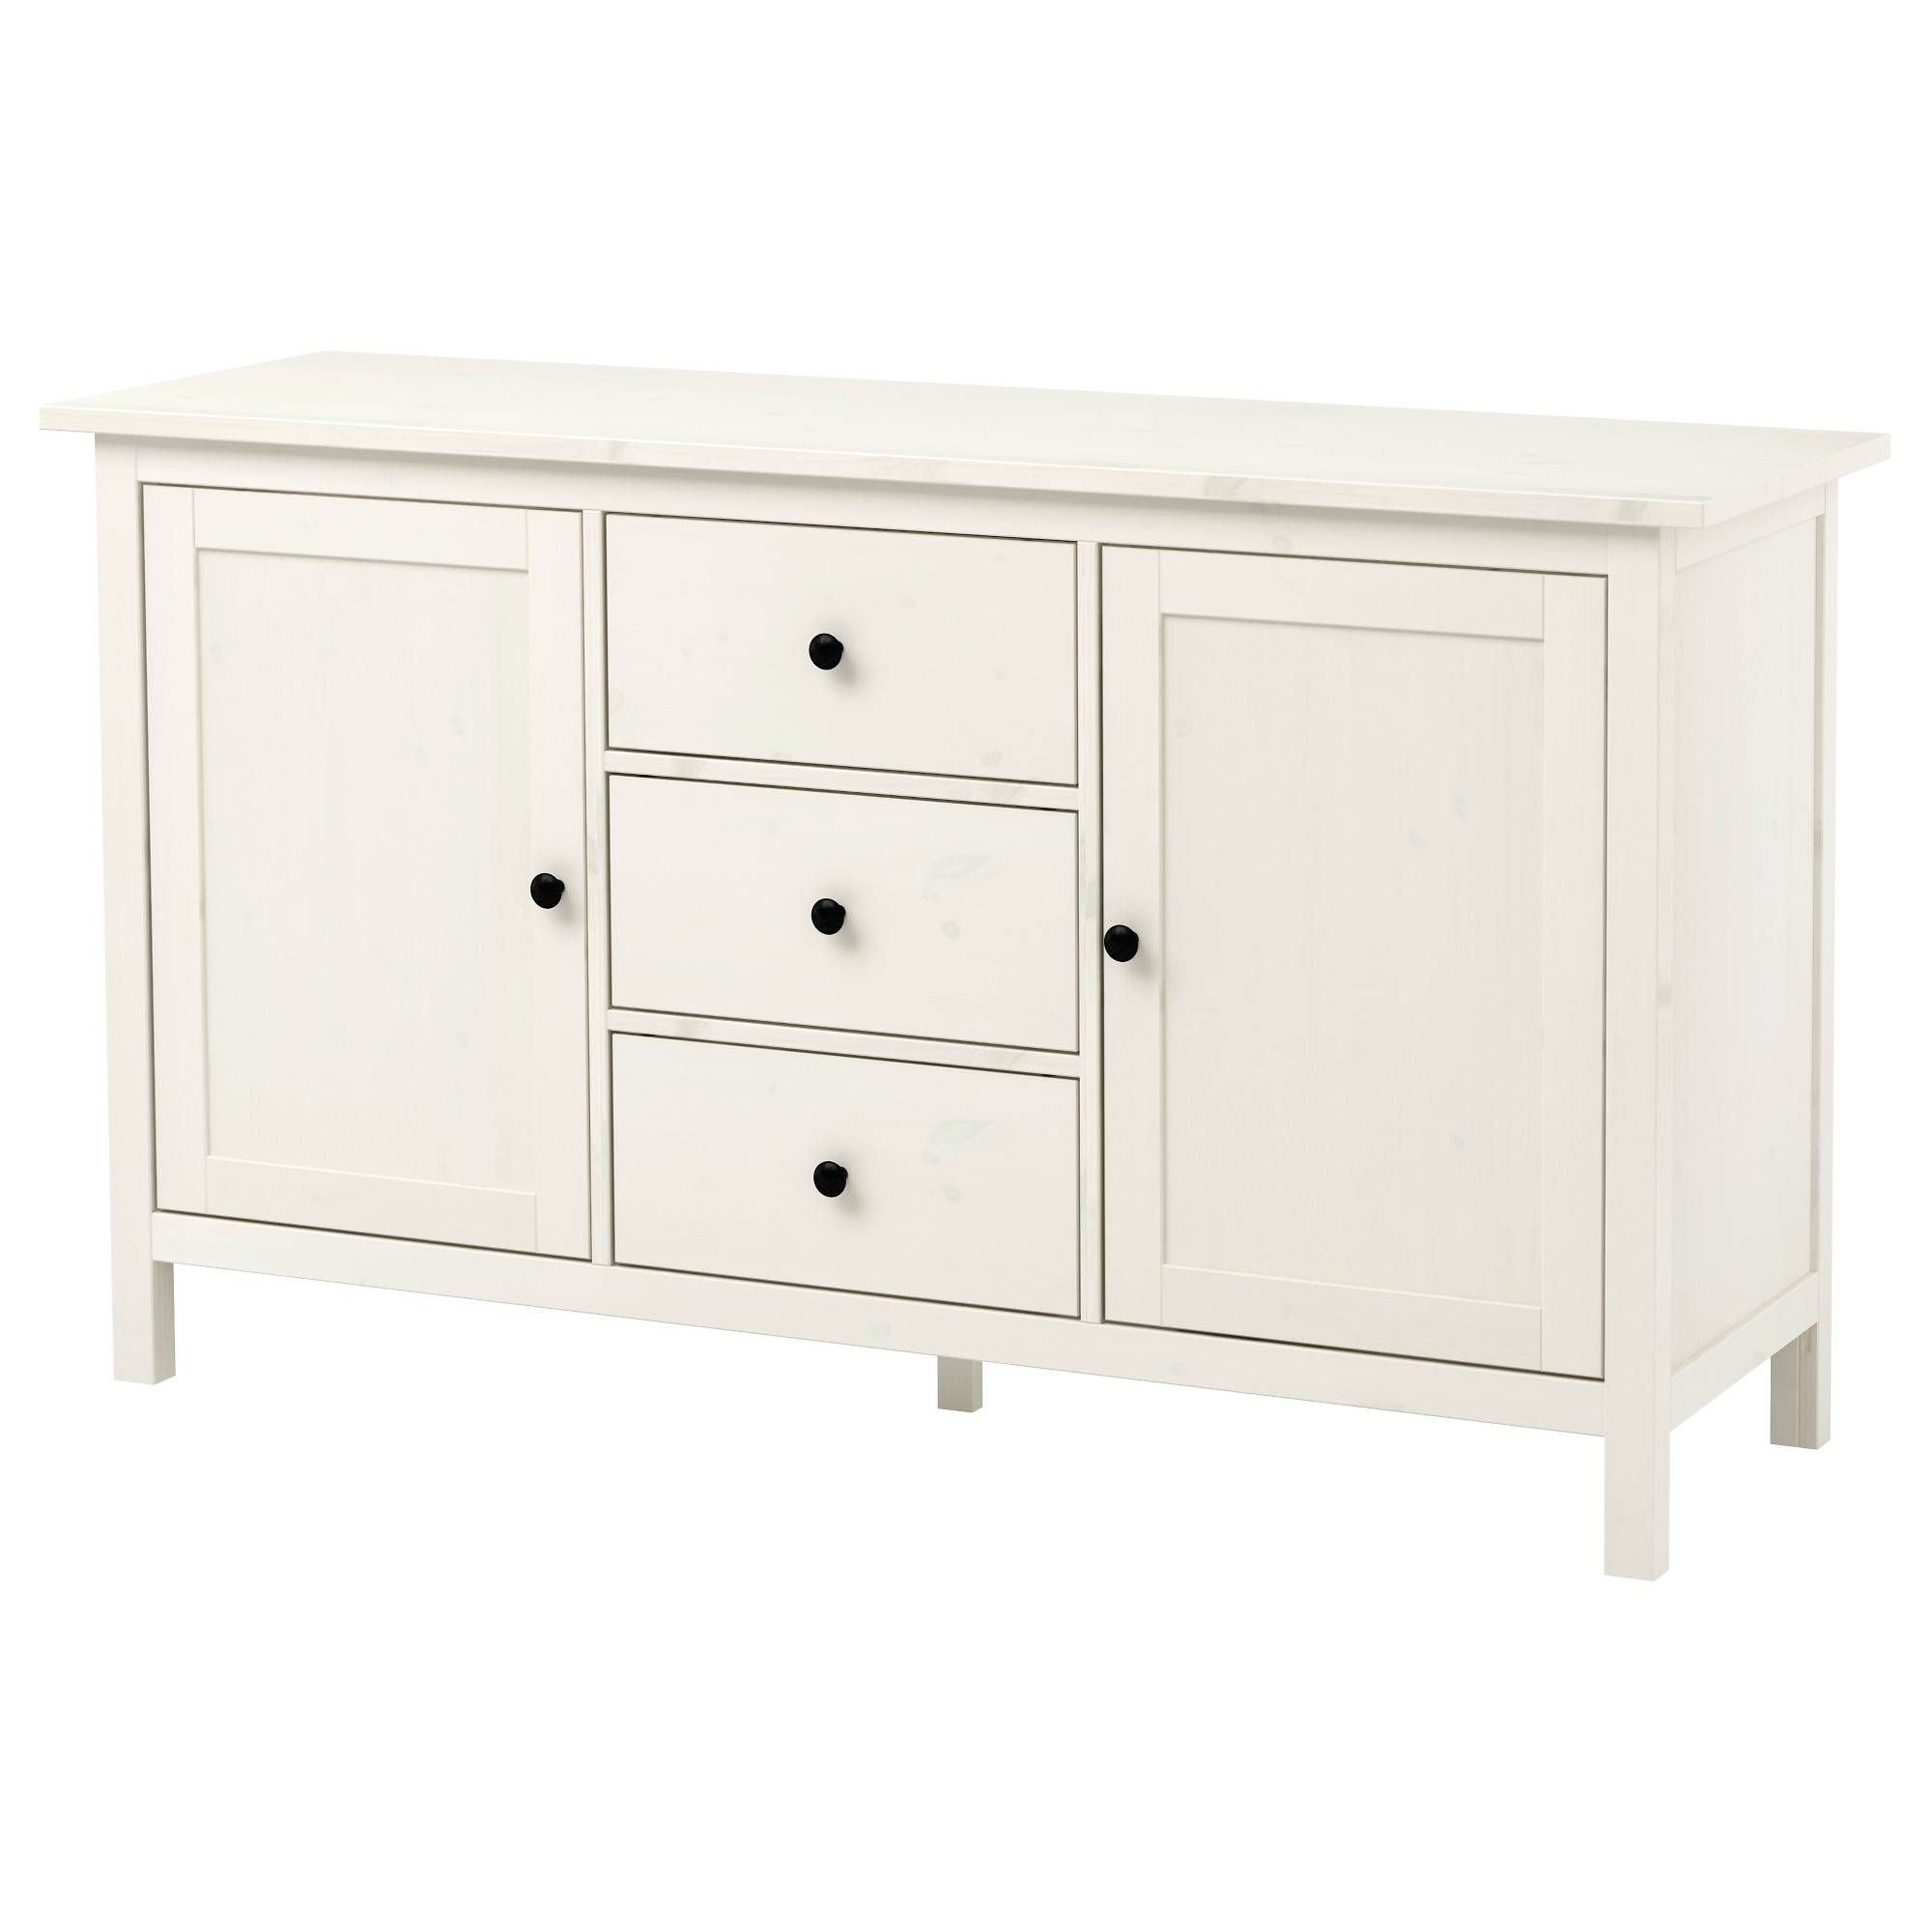 Occasional Tables & Hall Table | Ikea Pertaining To Buffet Console Sideboards (View 6 of 15)